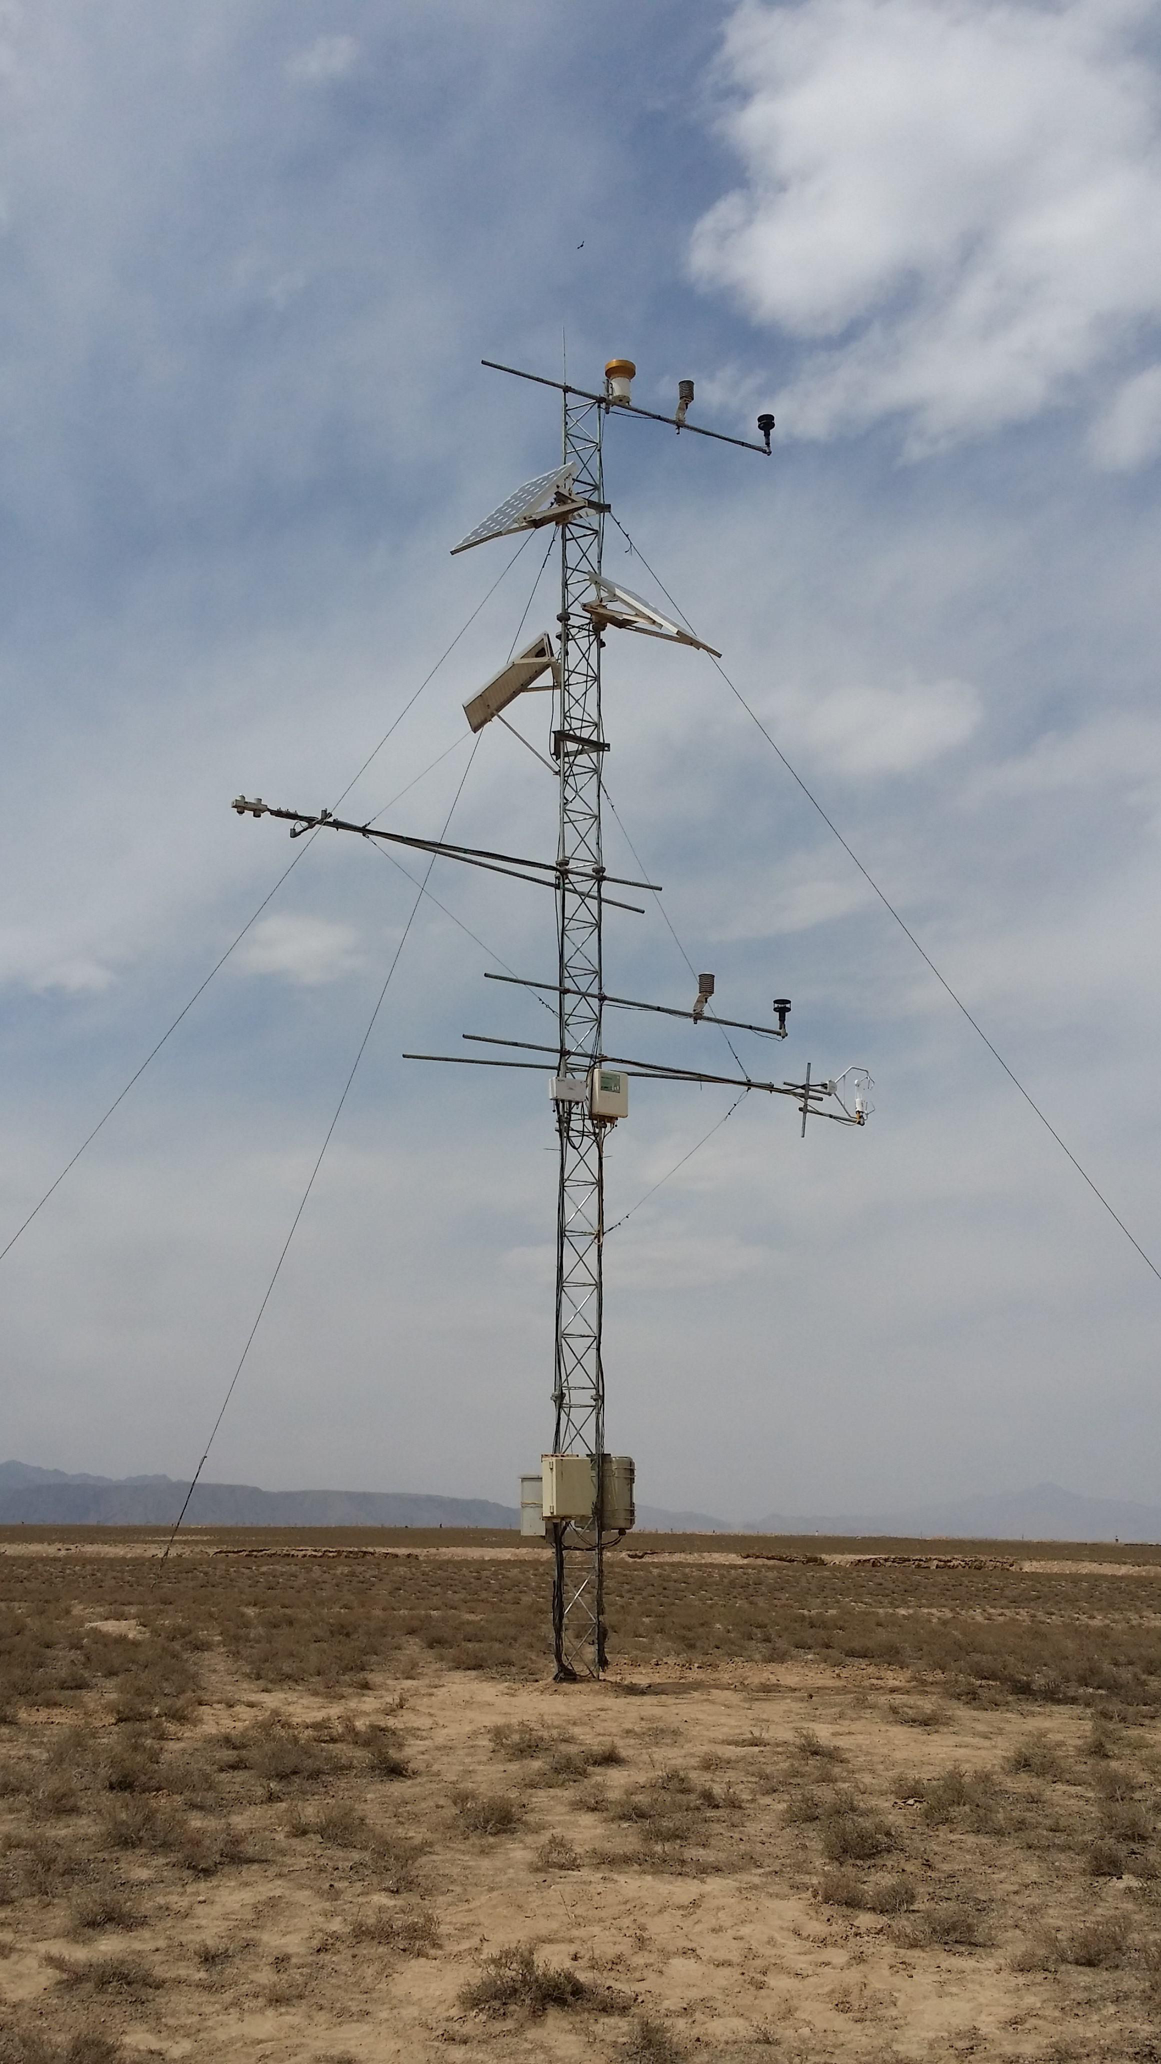 Qilian Mountains integrated observatory network: Dataset of Heihe integrated observatory network (automatic weather station of Huazhaizi desert steppe station, 2019)